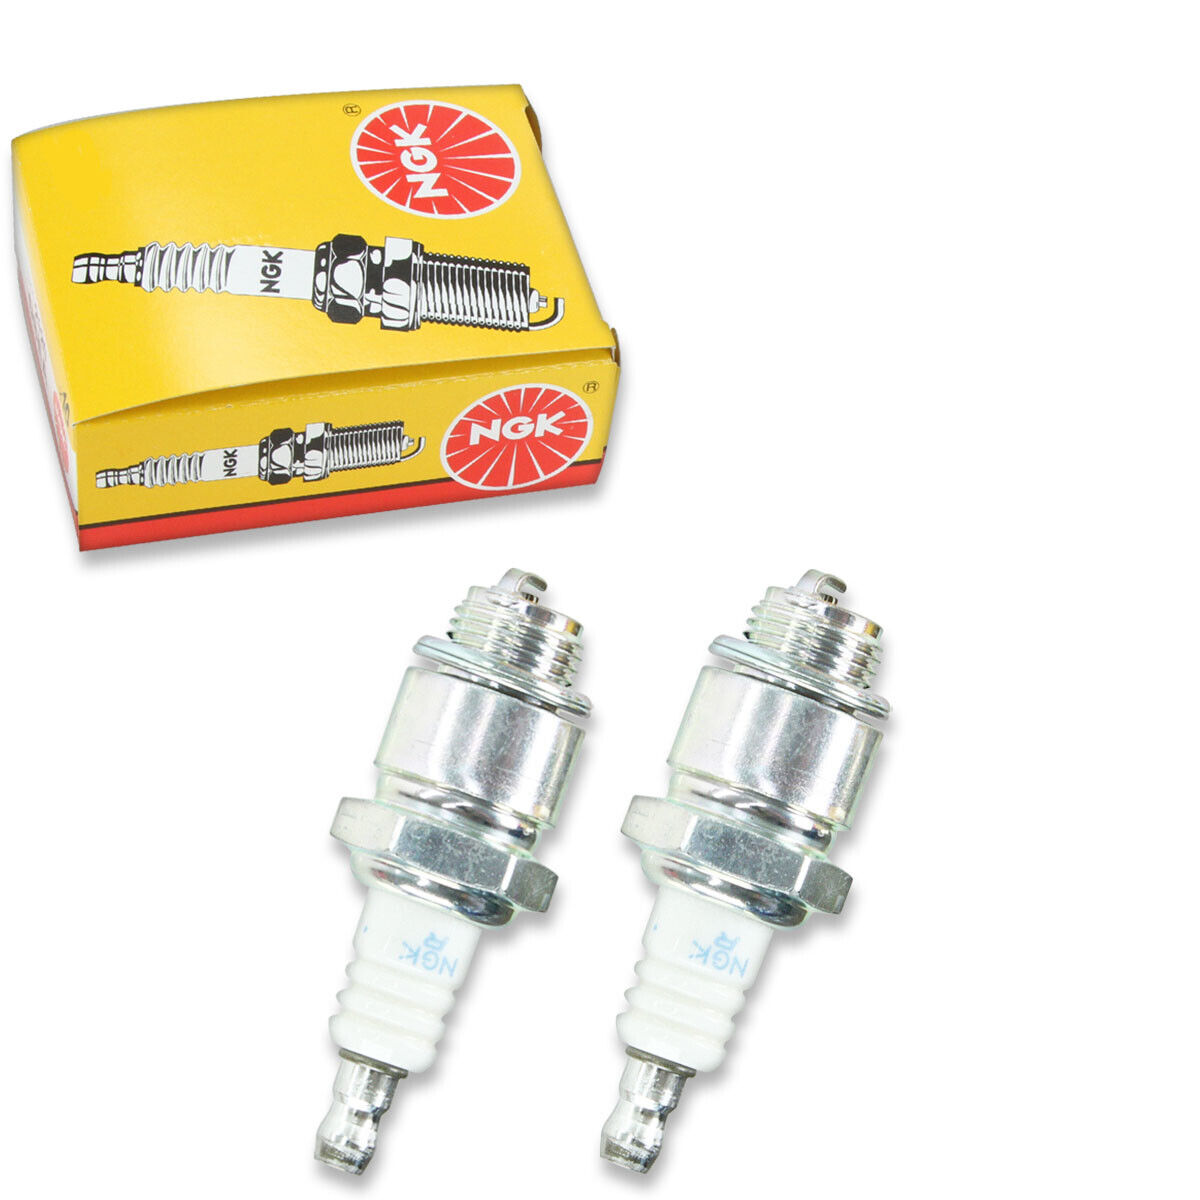 2 pc NGK 5798 BR2-LM Standard Spark Plugs for WR12EC WR11E0 W9LMR-US TY26715 ud